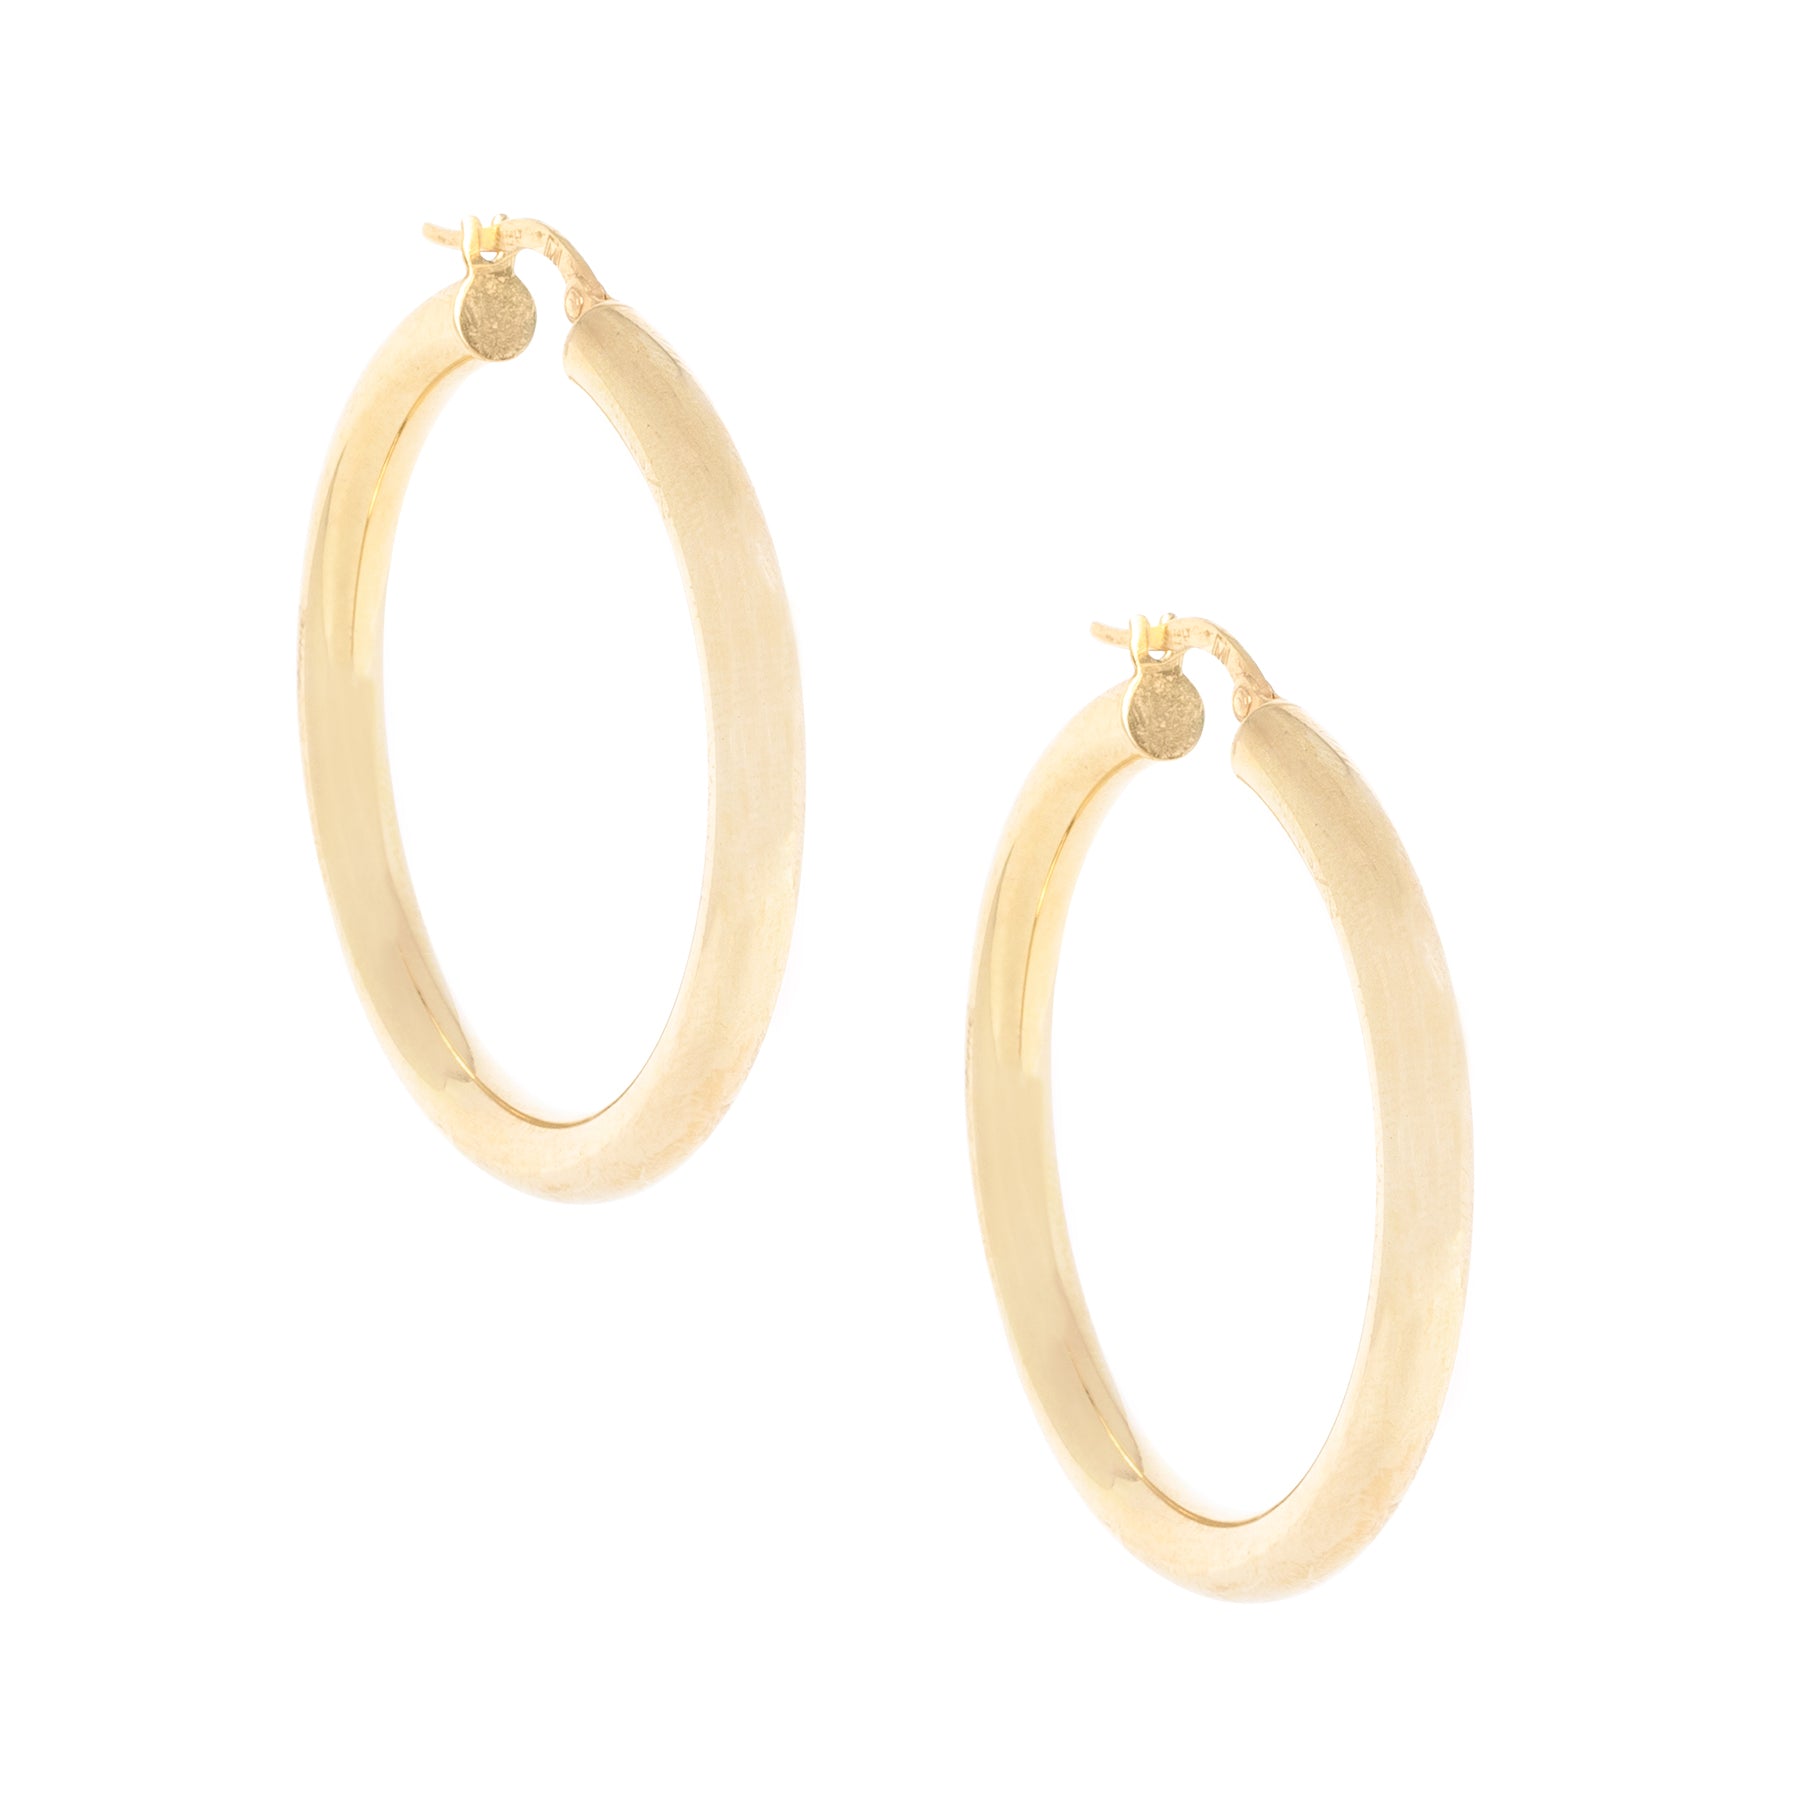 2.5" 4MM Thick Gold Hoops - Nina Segal Jewelry